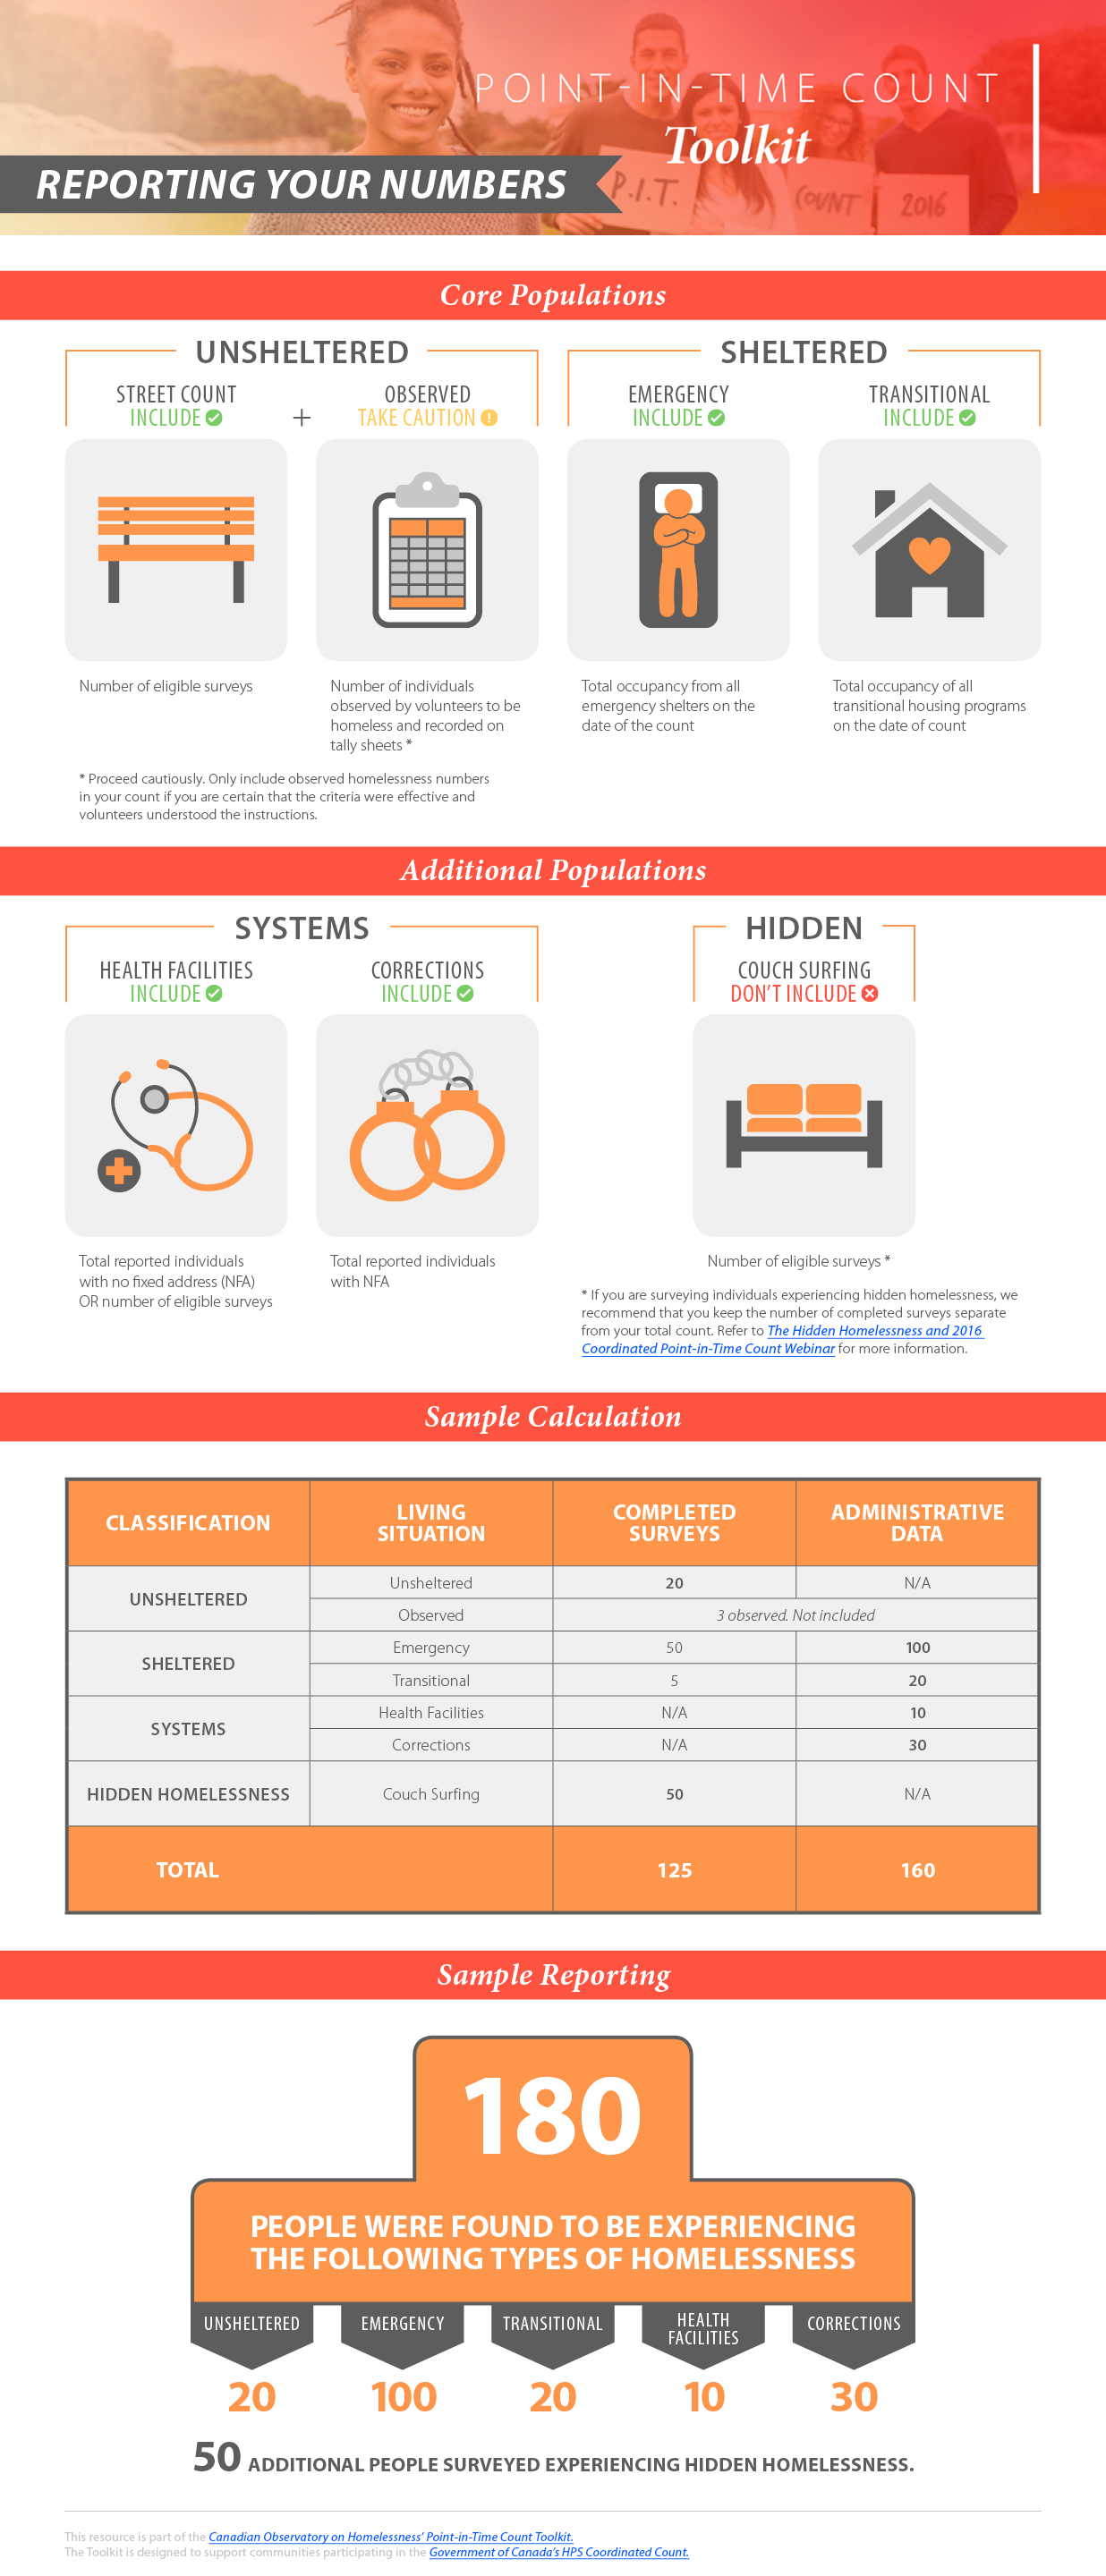 Reporting your numbers infographic is also available as a PDF.